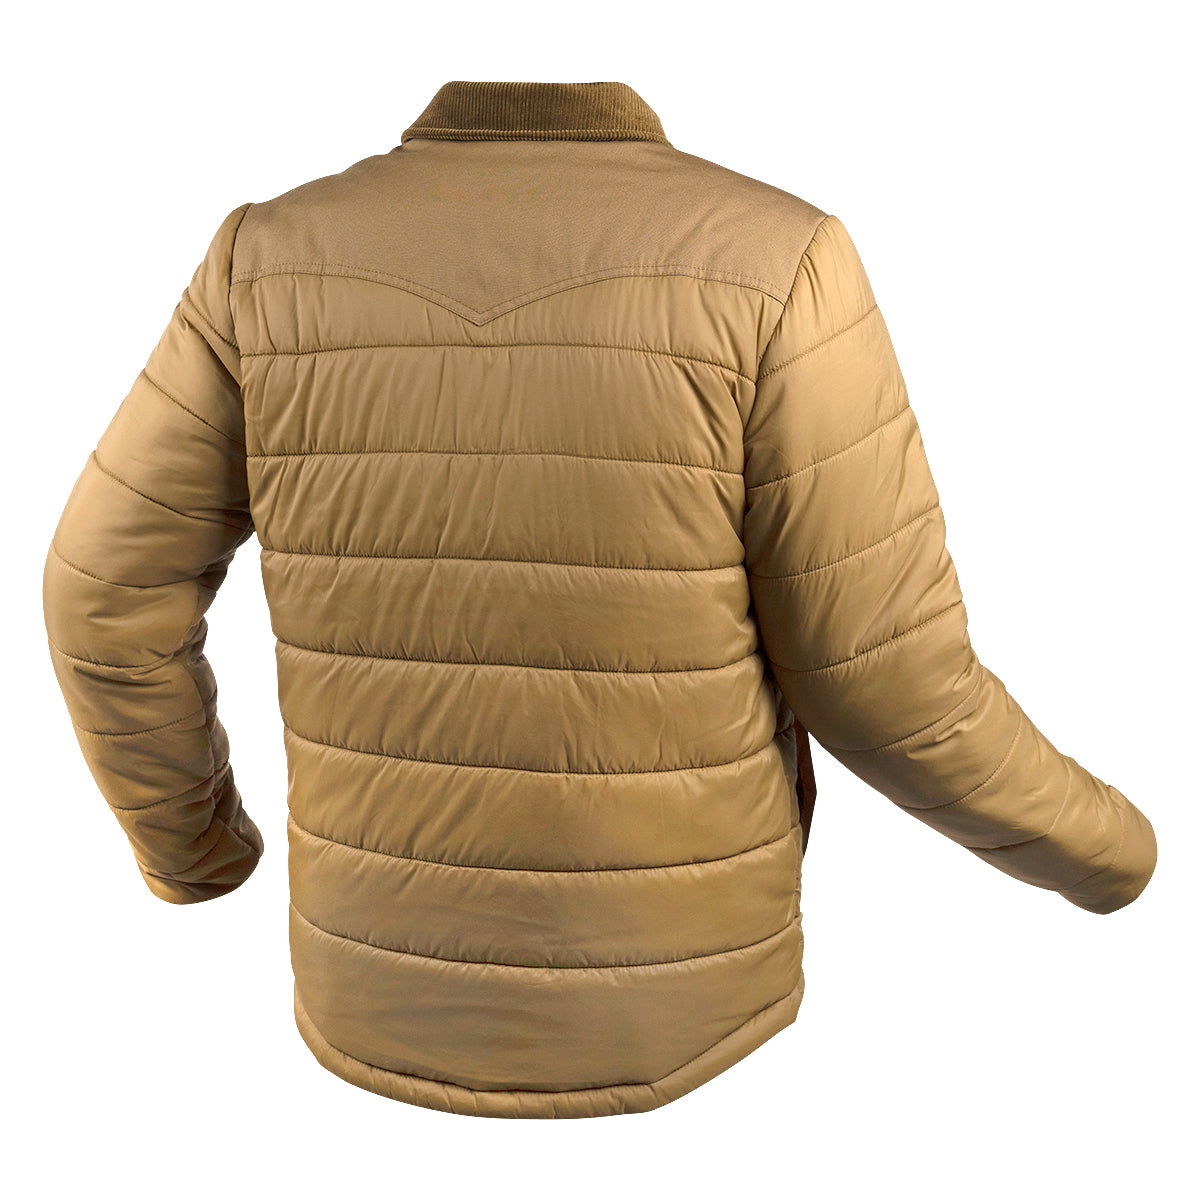 Fasthouse Prospector Puffer Jacket